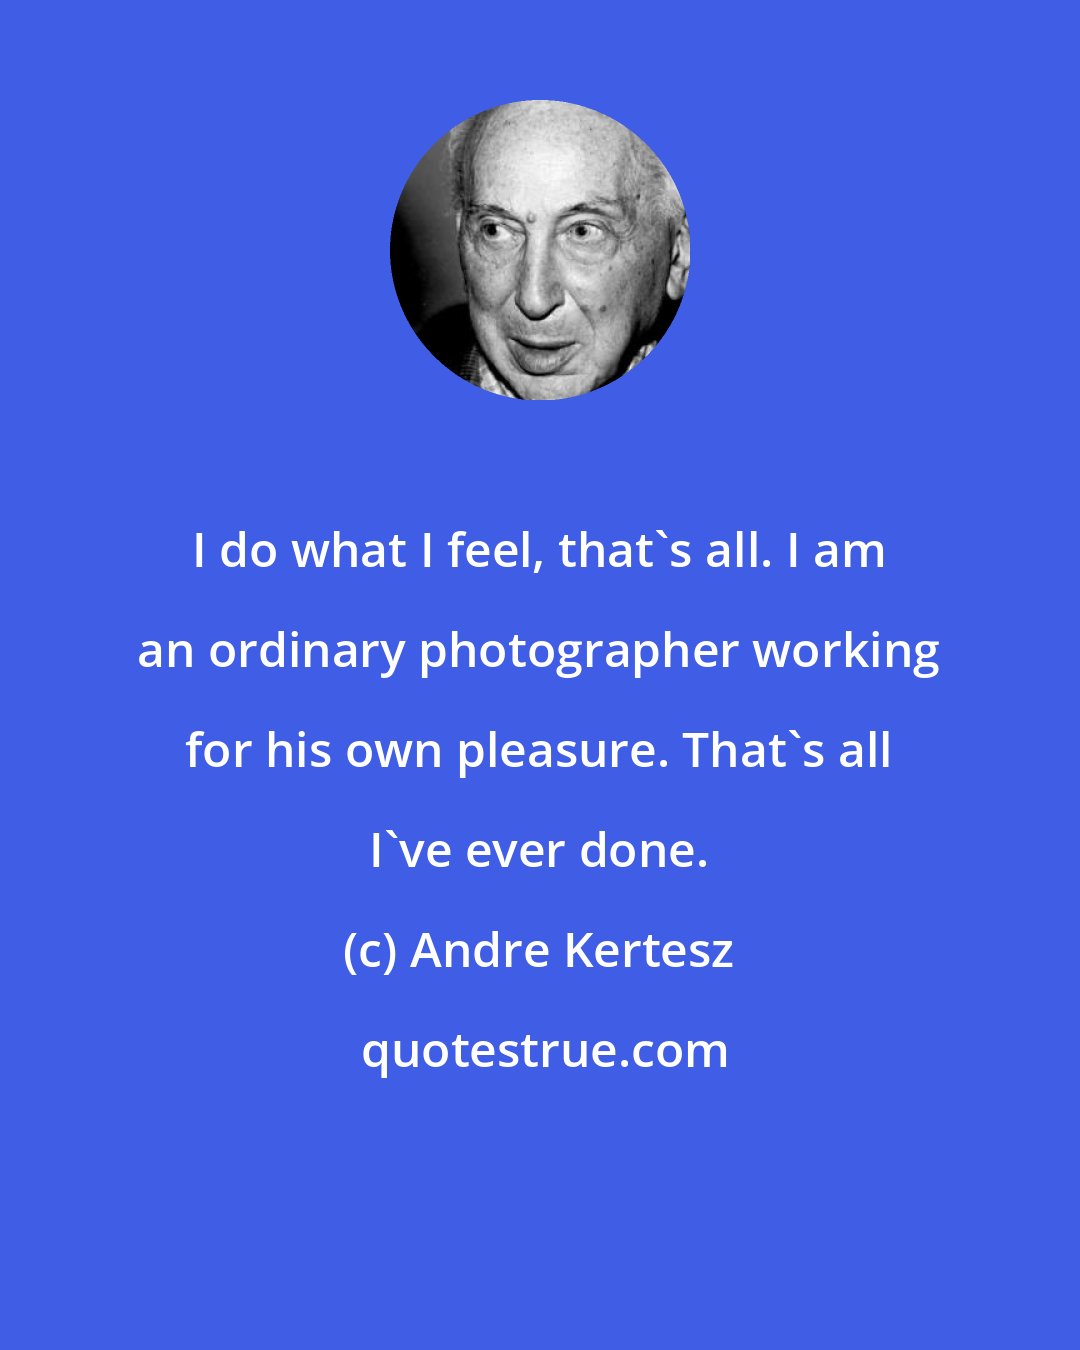 Andre Kertesz: I do what I feel, that's all. I am an ordinary photographer working for his own pleasure. That's all I've ever done.